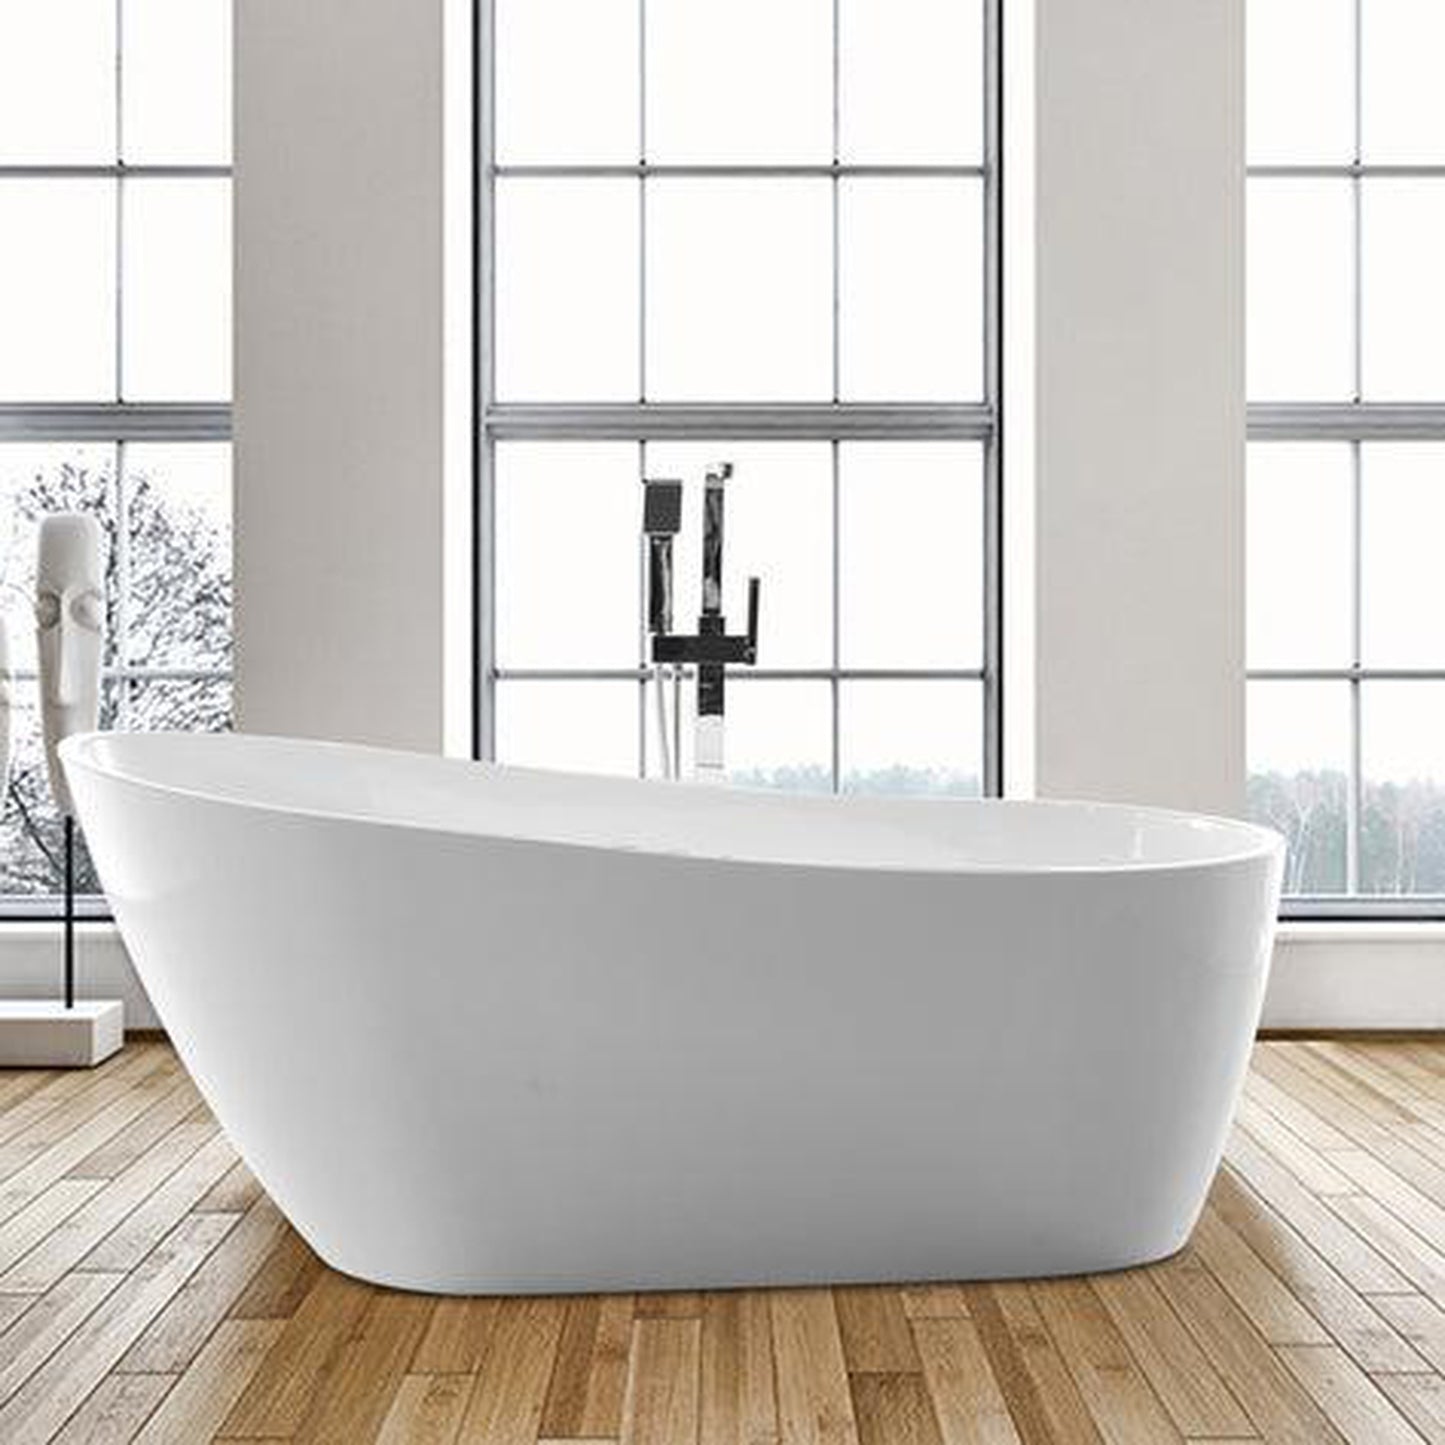 Vanity Art 55" x 29" White Acrylic Modern Freestanding Bathtub With Polished Chrome Pop-up Drain, Slotted Overflow and Flexible Drain Hose